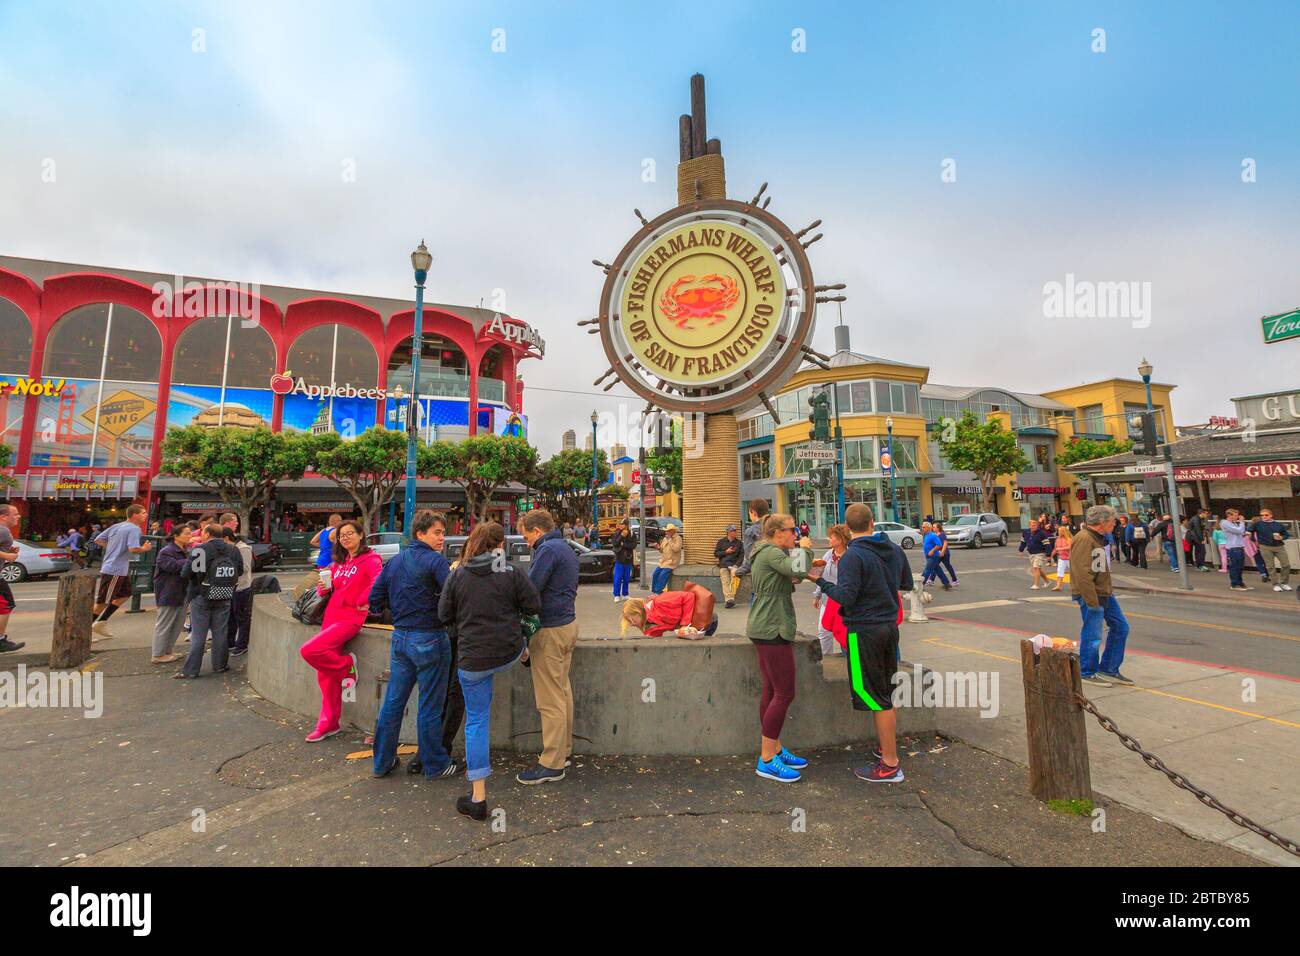 San Francisco, California, United States - August 14, 2016: tourists at Fisherman's Wharf of San Francisco on Jefferson road. The Fisherman's Wharf is Stock Photo